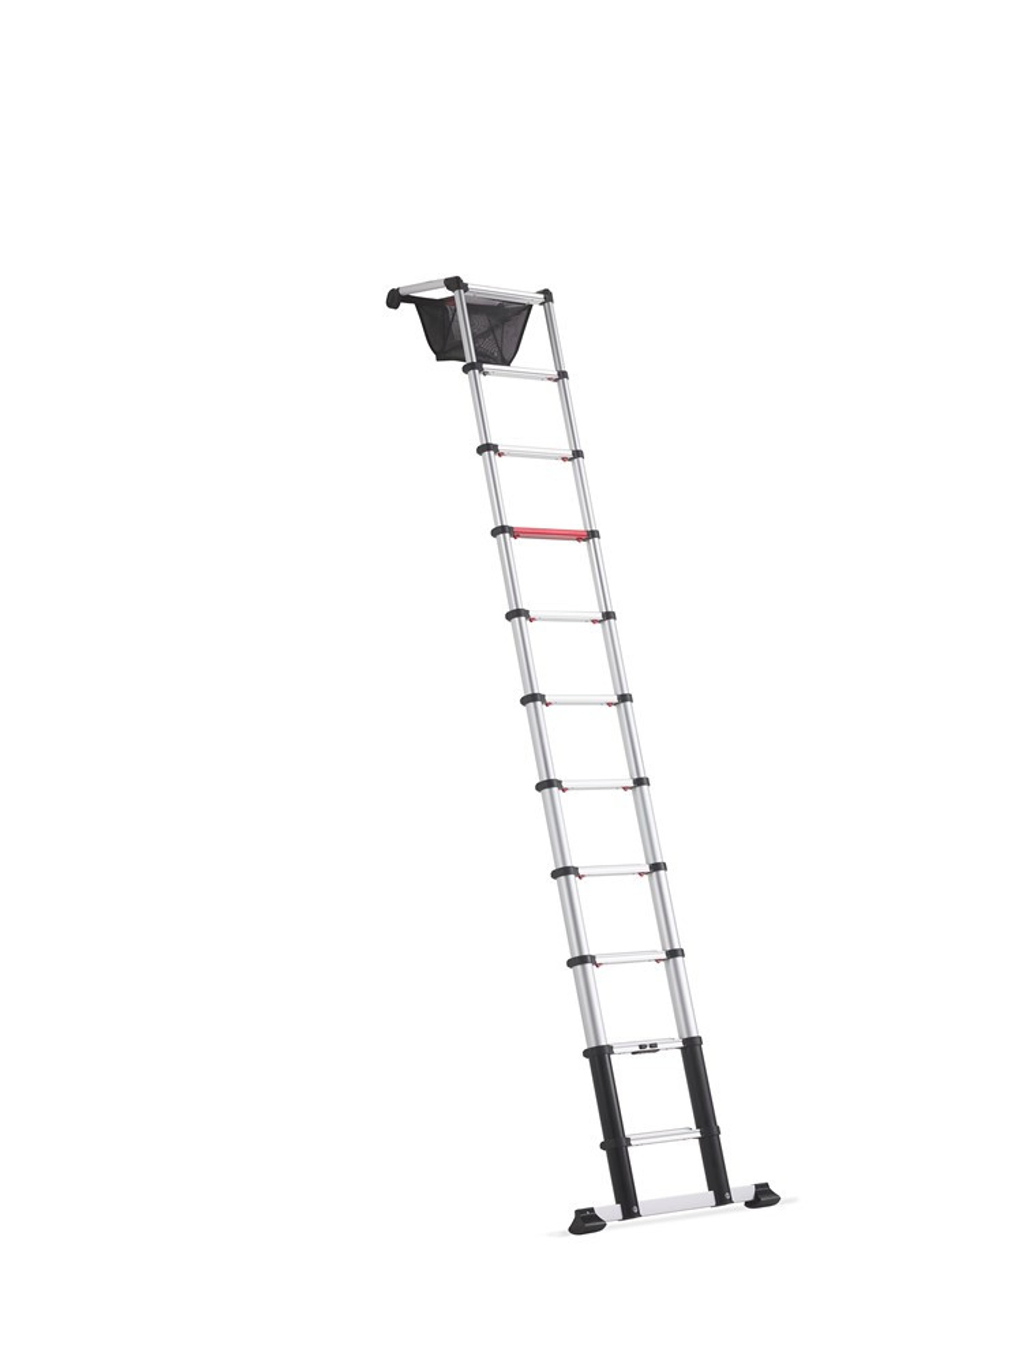 Rent the professional telescopic ladder 11 steps 4.2 meters from Altrex at BIYU. Compact, lightweight and adjustable in height. Perfect for working in small spaces.